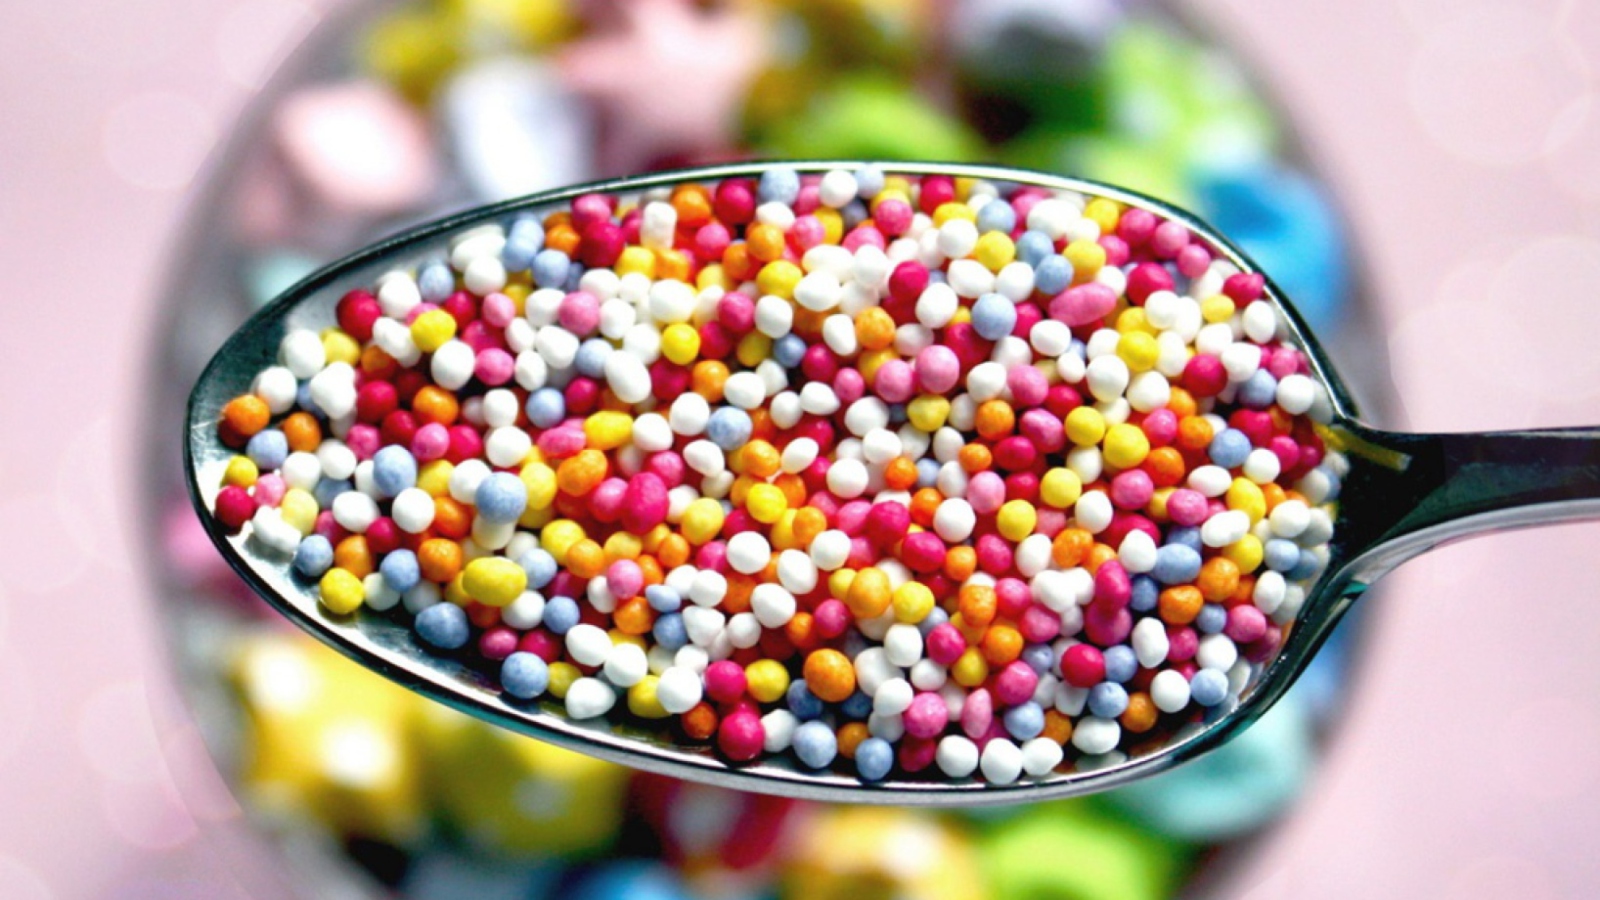 Colorful Candies wallpaper 1600x900